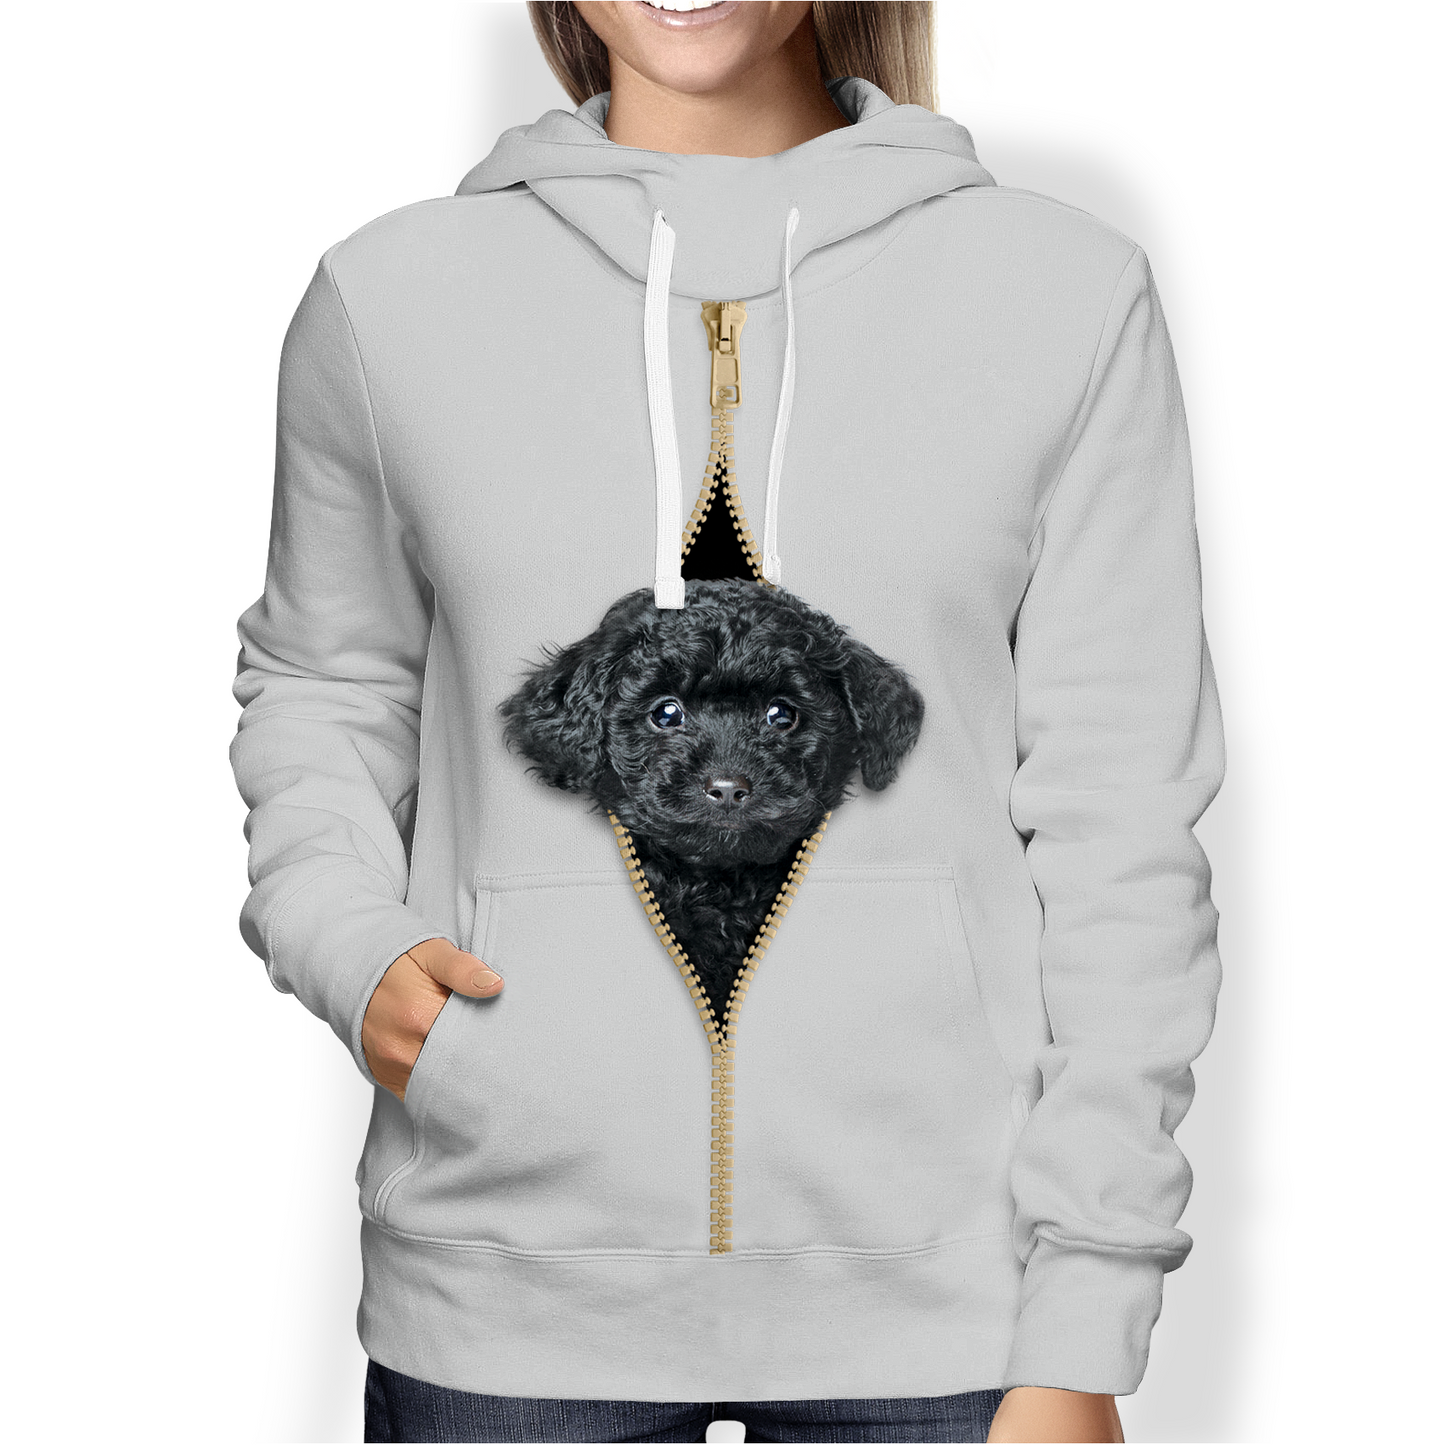 I'm With You - Poodle Hoodie V4